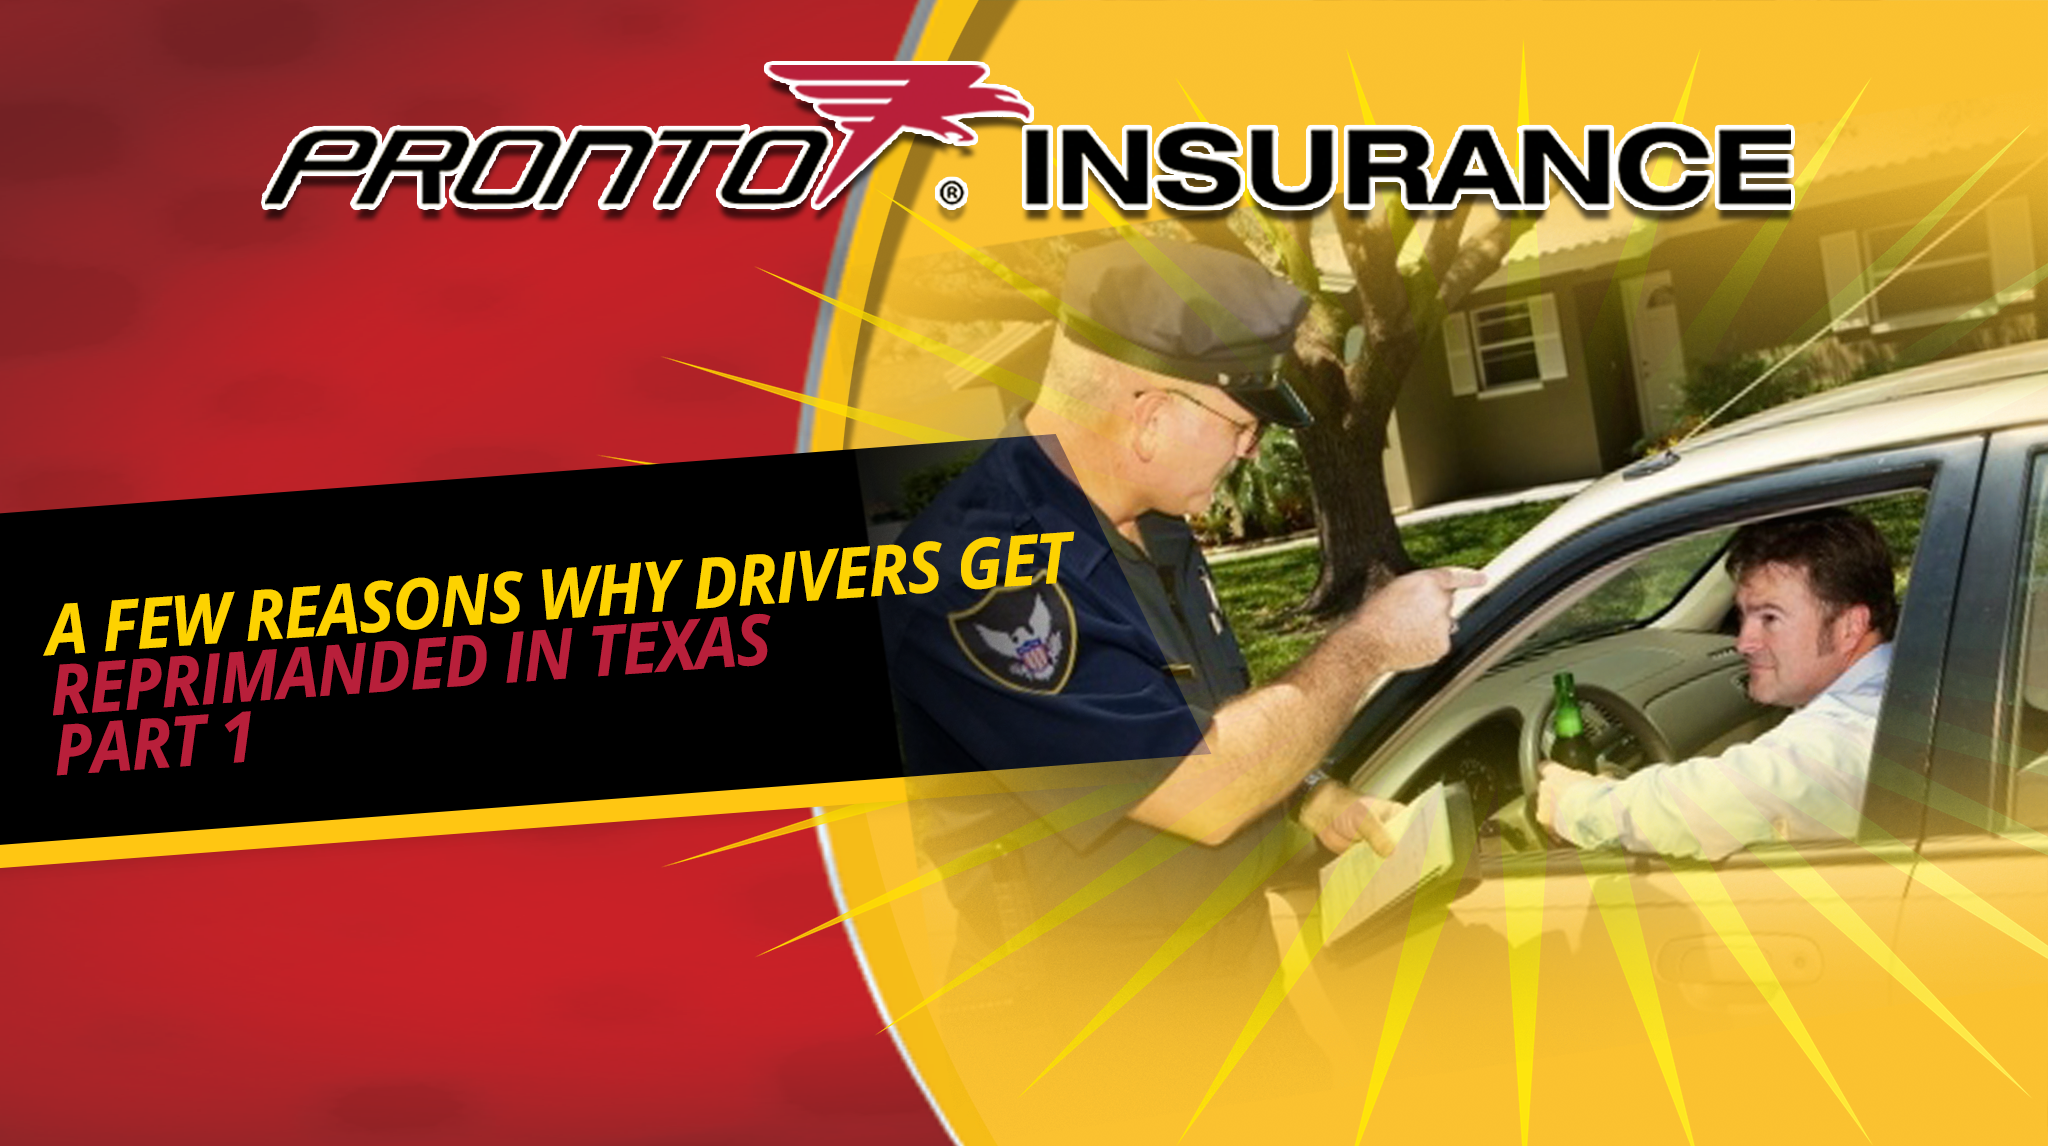 A Few Reasons Why Drivers Get Reprimanded in Texas